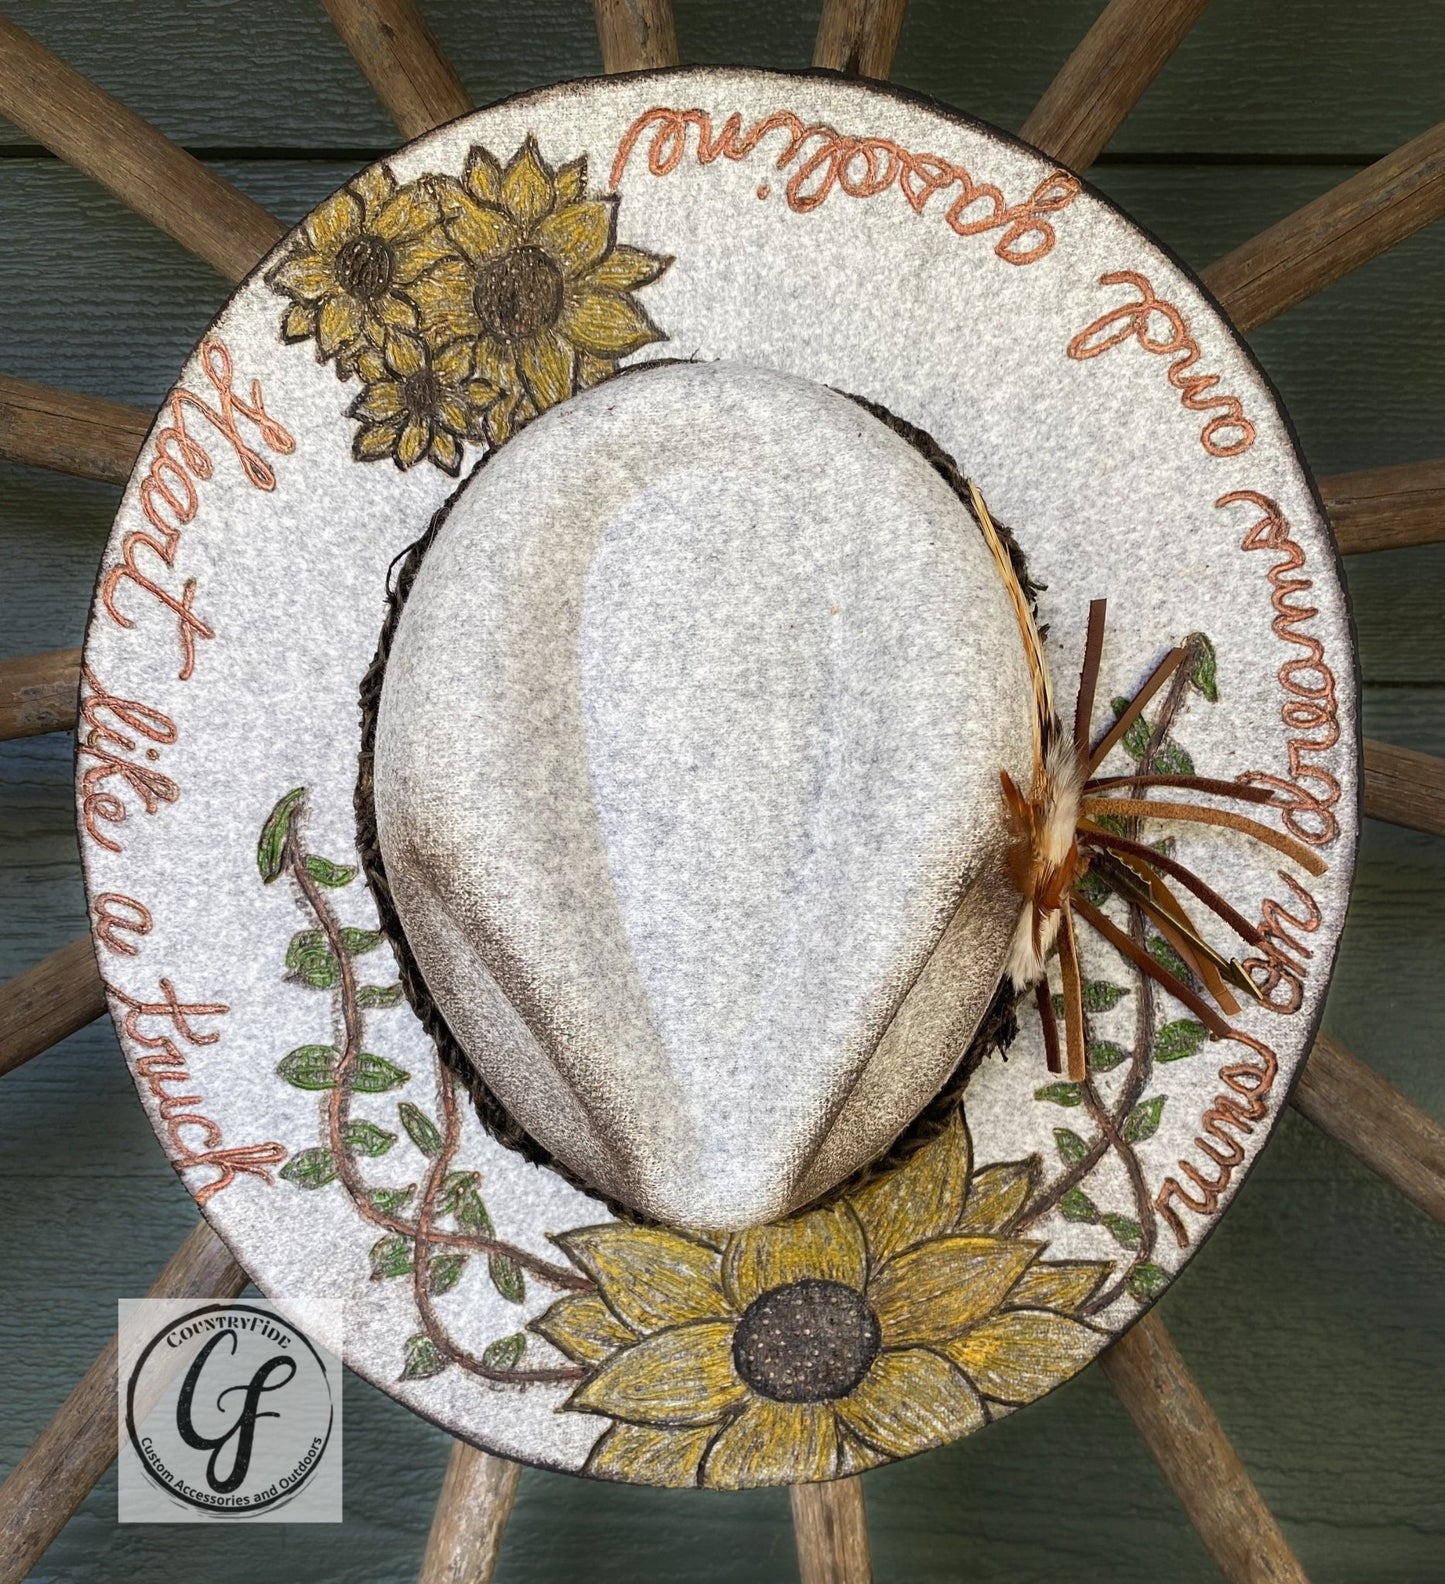 Heart Like A Truck Sunflower Fedora - CountryFide Custom Accessories and Outdoors